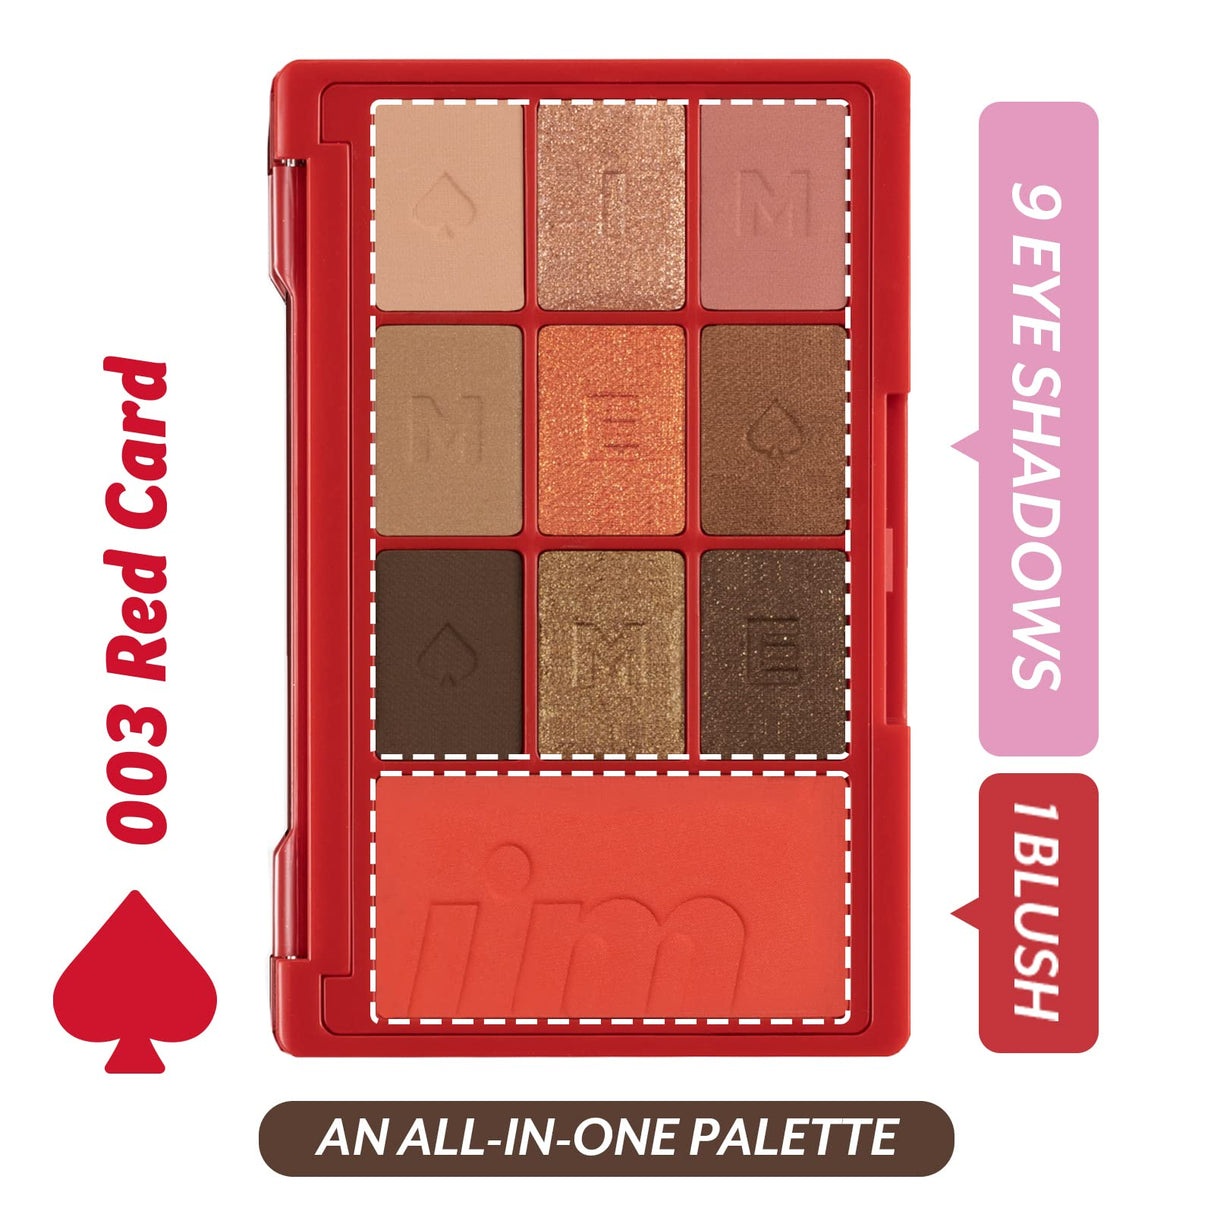 Official Shop|I'M MEME IM Hiddun Card Palette | Portable Size with 9 Eye Shadow Colors and 1 Cheek Palette with Mirror | 003 Red Card